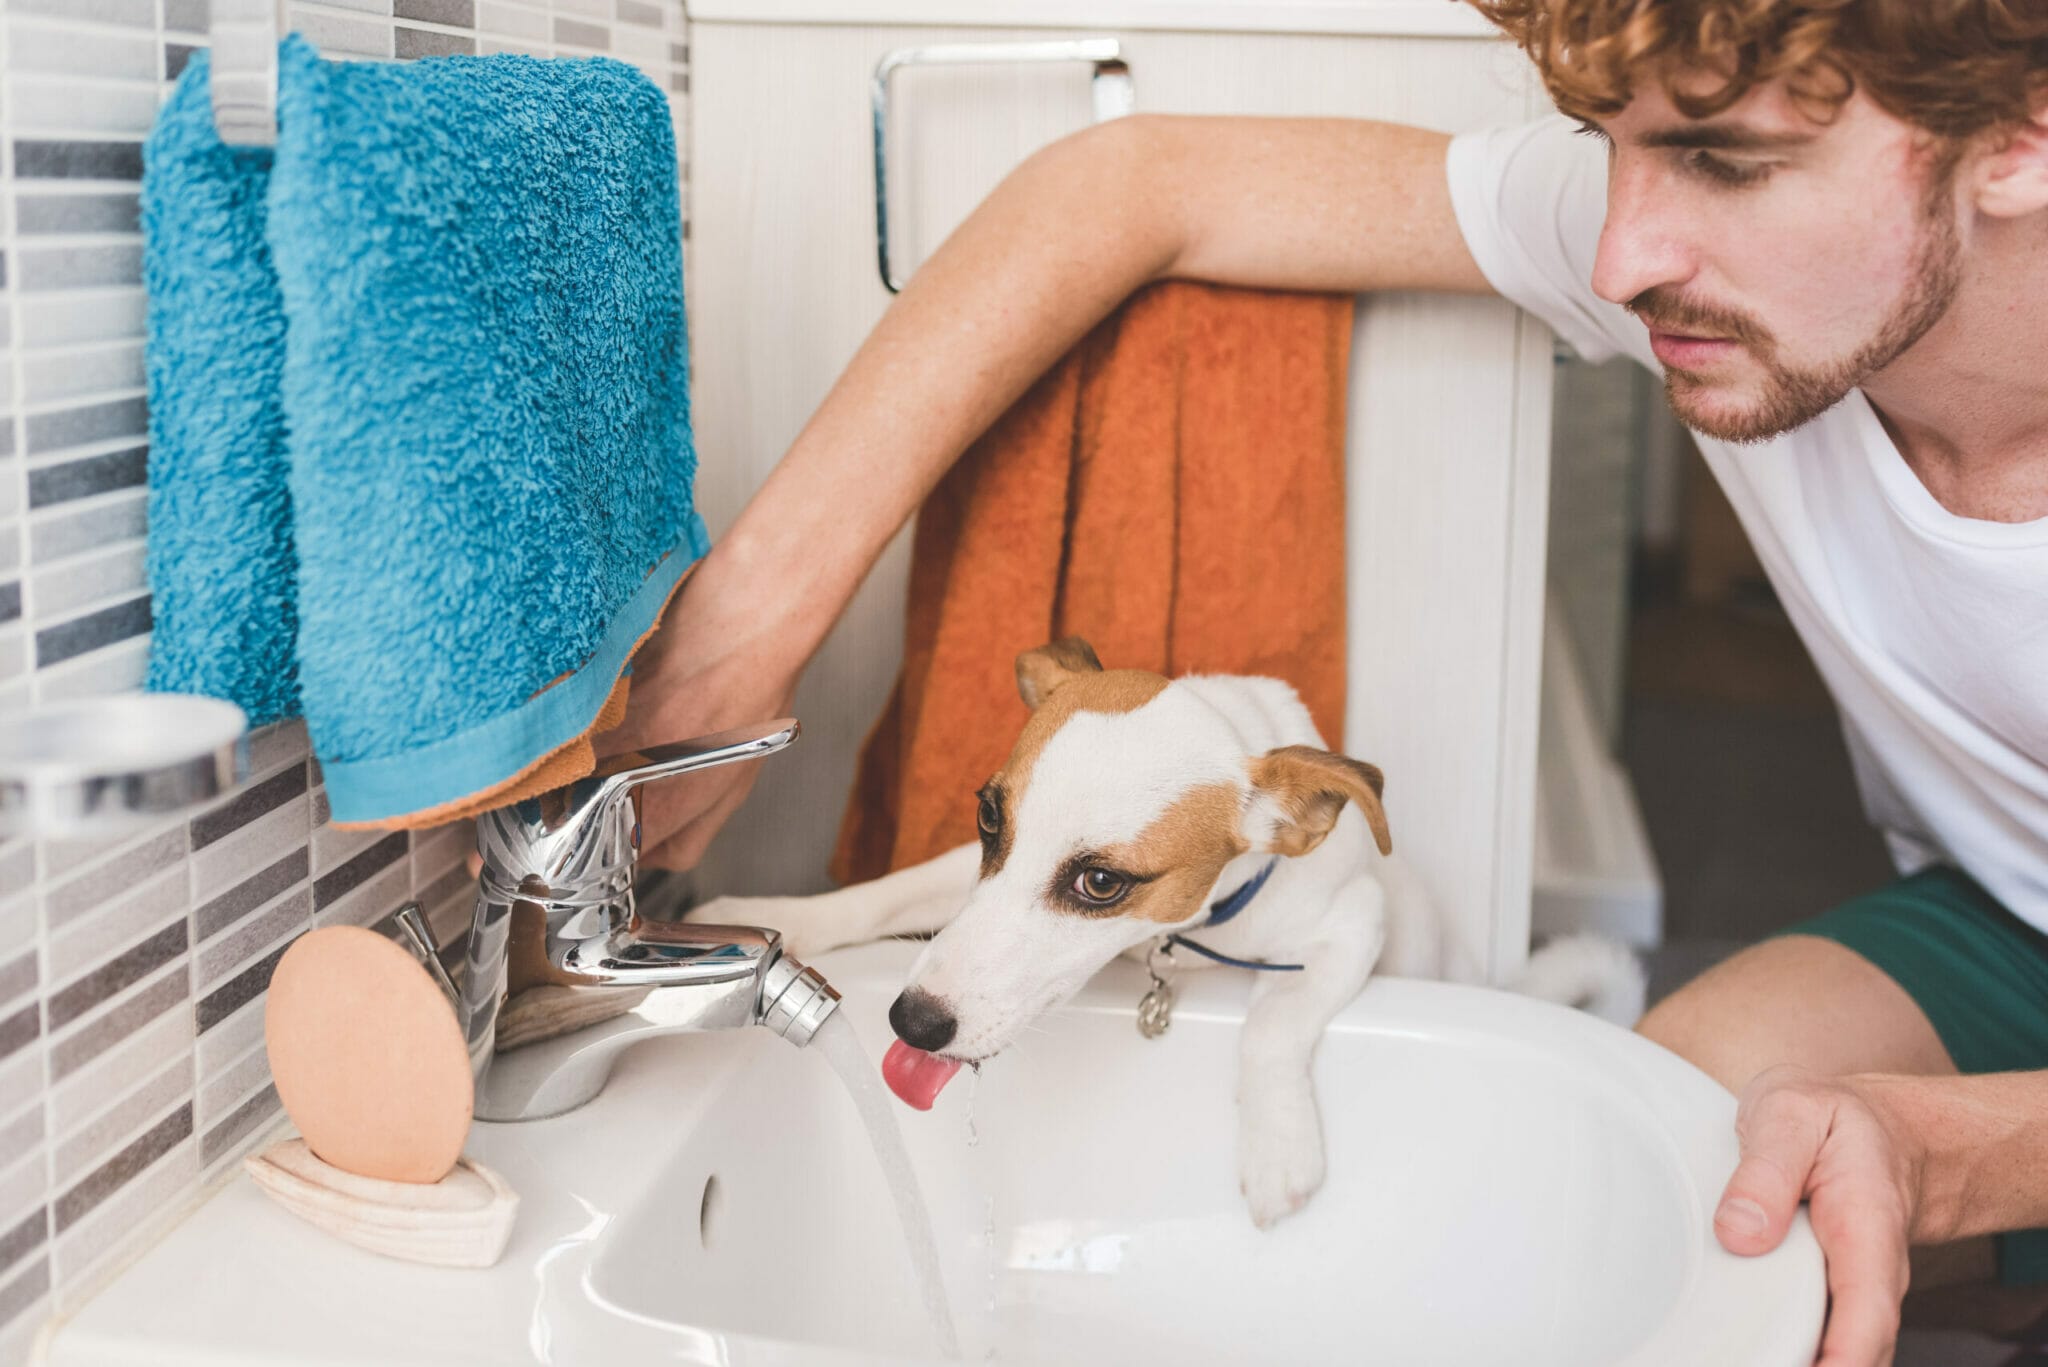 What can you do to avoid getting sick due to dog saliva?